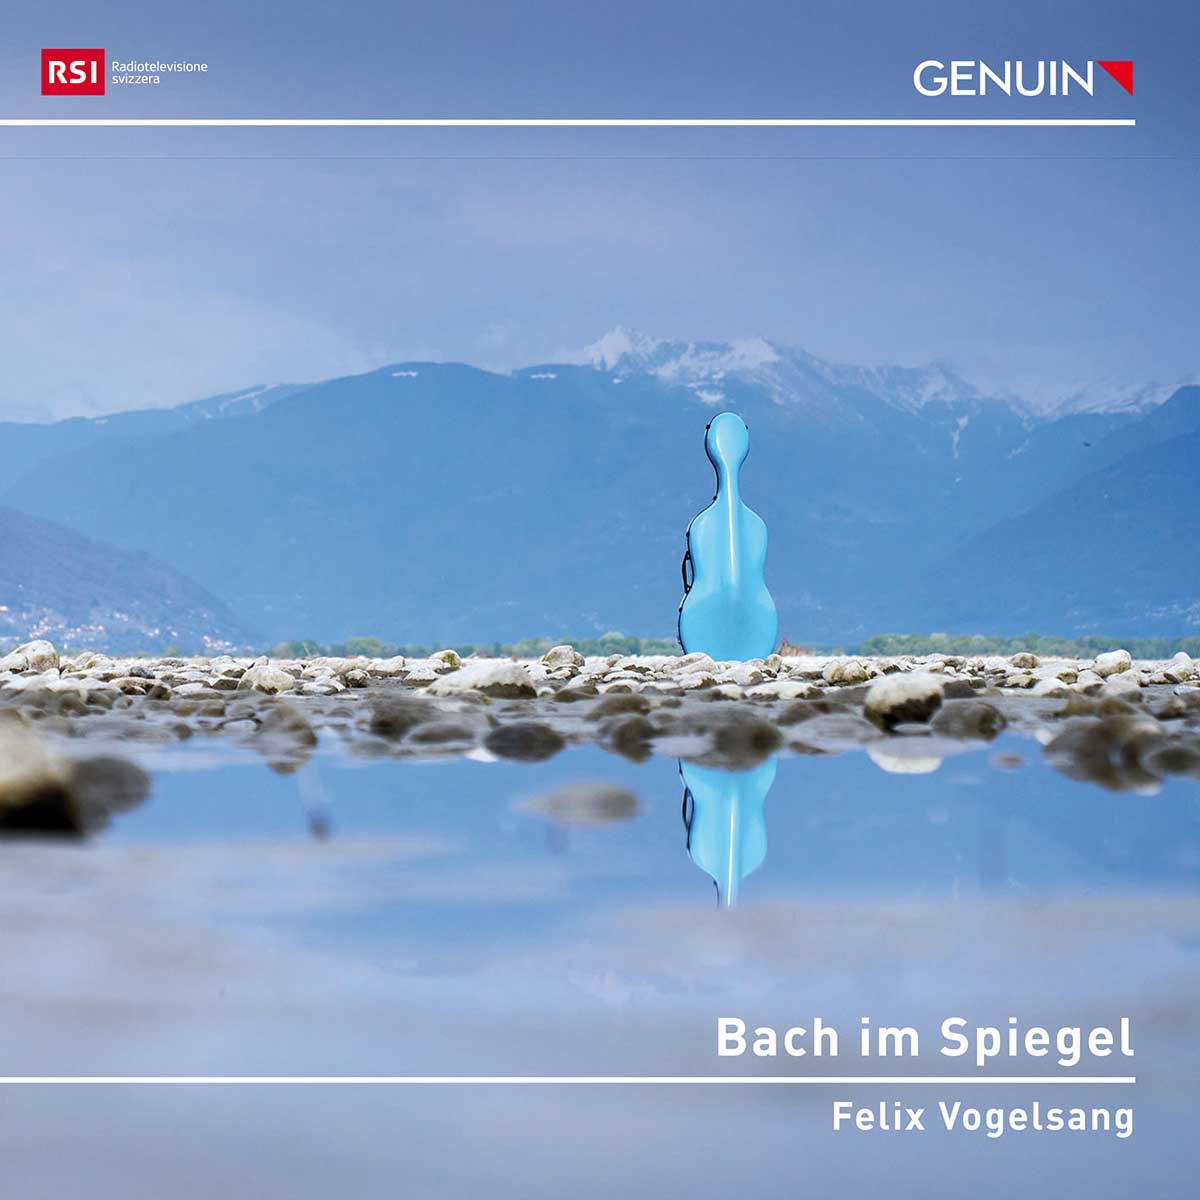 CD album cover 'Bach im Spiegel � Bach in the Mirror' (GEN 23821) with Felix Vogelsang